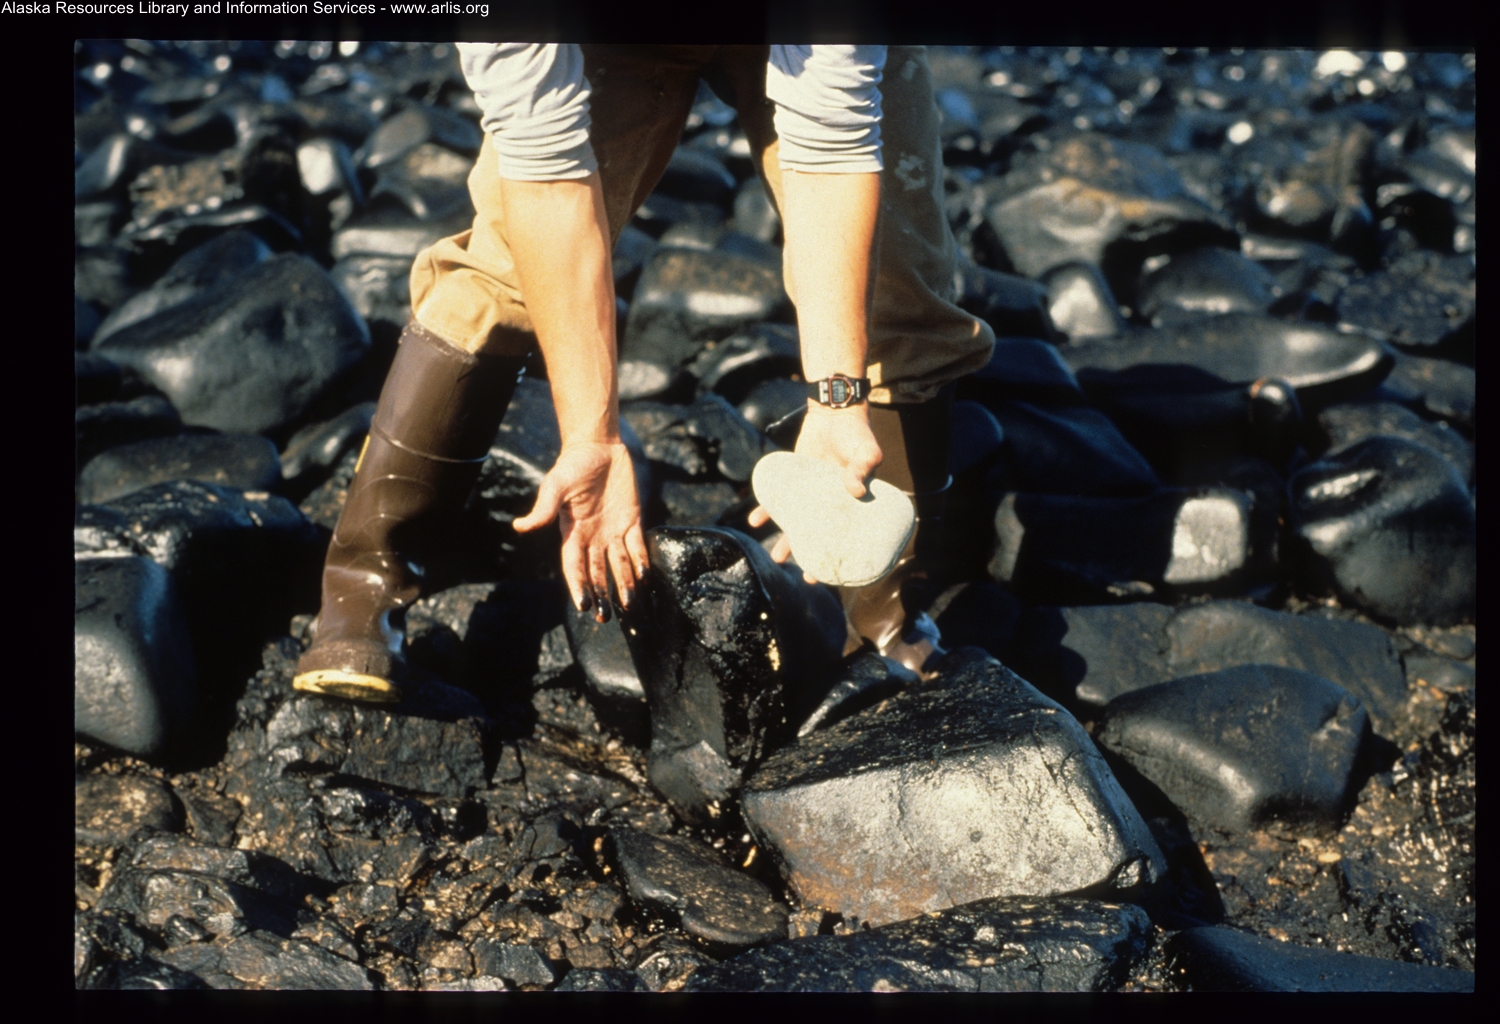 Cleanup worker on beach with hands covered in oil. Image credit: Alaska Public Archives